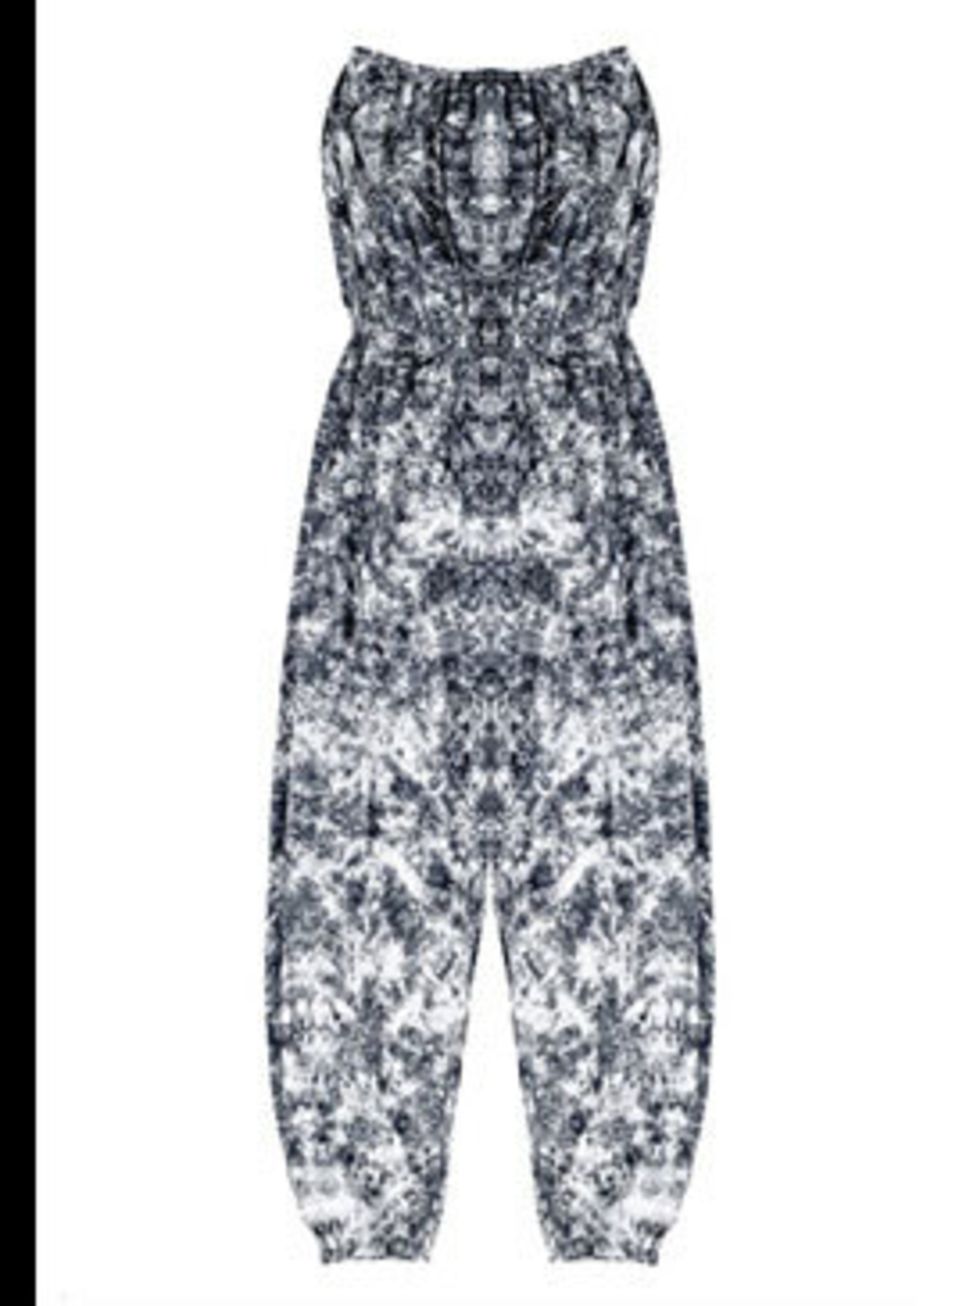 <p>Jumpsuit £105 by Maurie&amp;Eve at <a href="http://www.bunnyhug.co.uk/fashionshop/gbu0-prodshow/Maurie_and_Eve_Strapless_Jumpsuit_in_Black_Smoke.html">Bunnyhug</a></p>